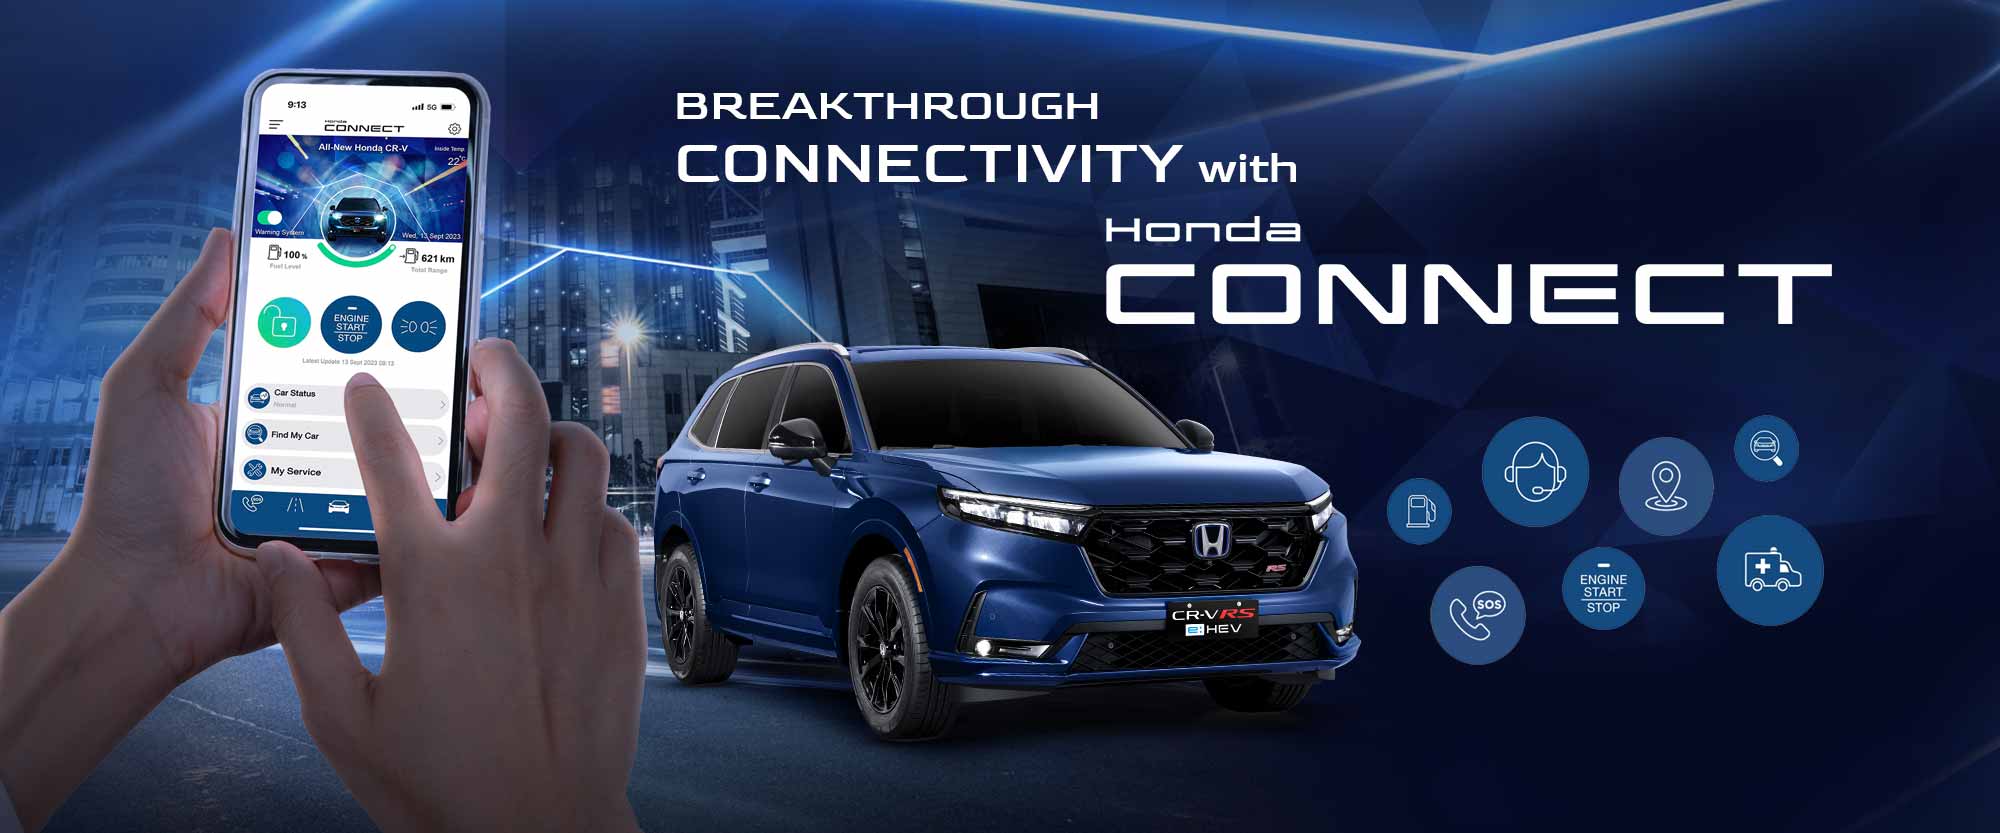 Breakthrough Connectivity with Honda CONNECT